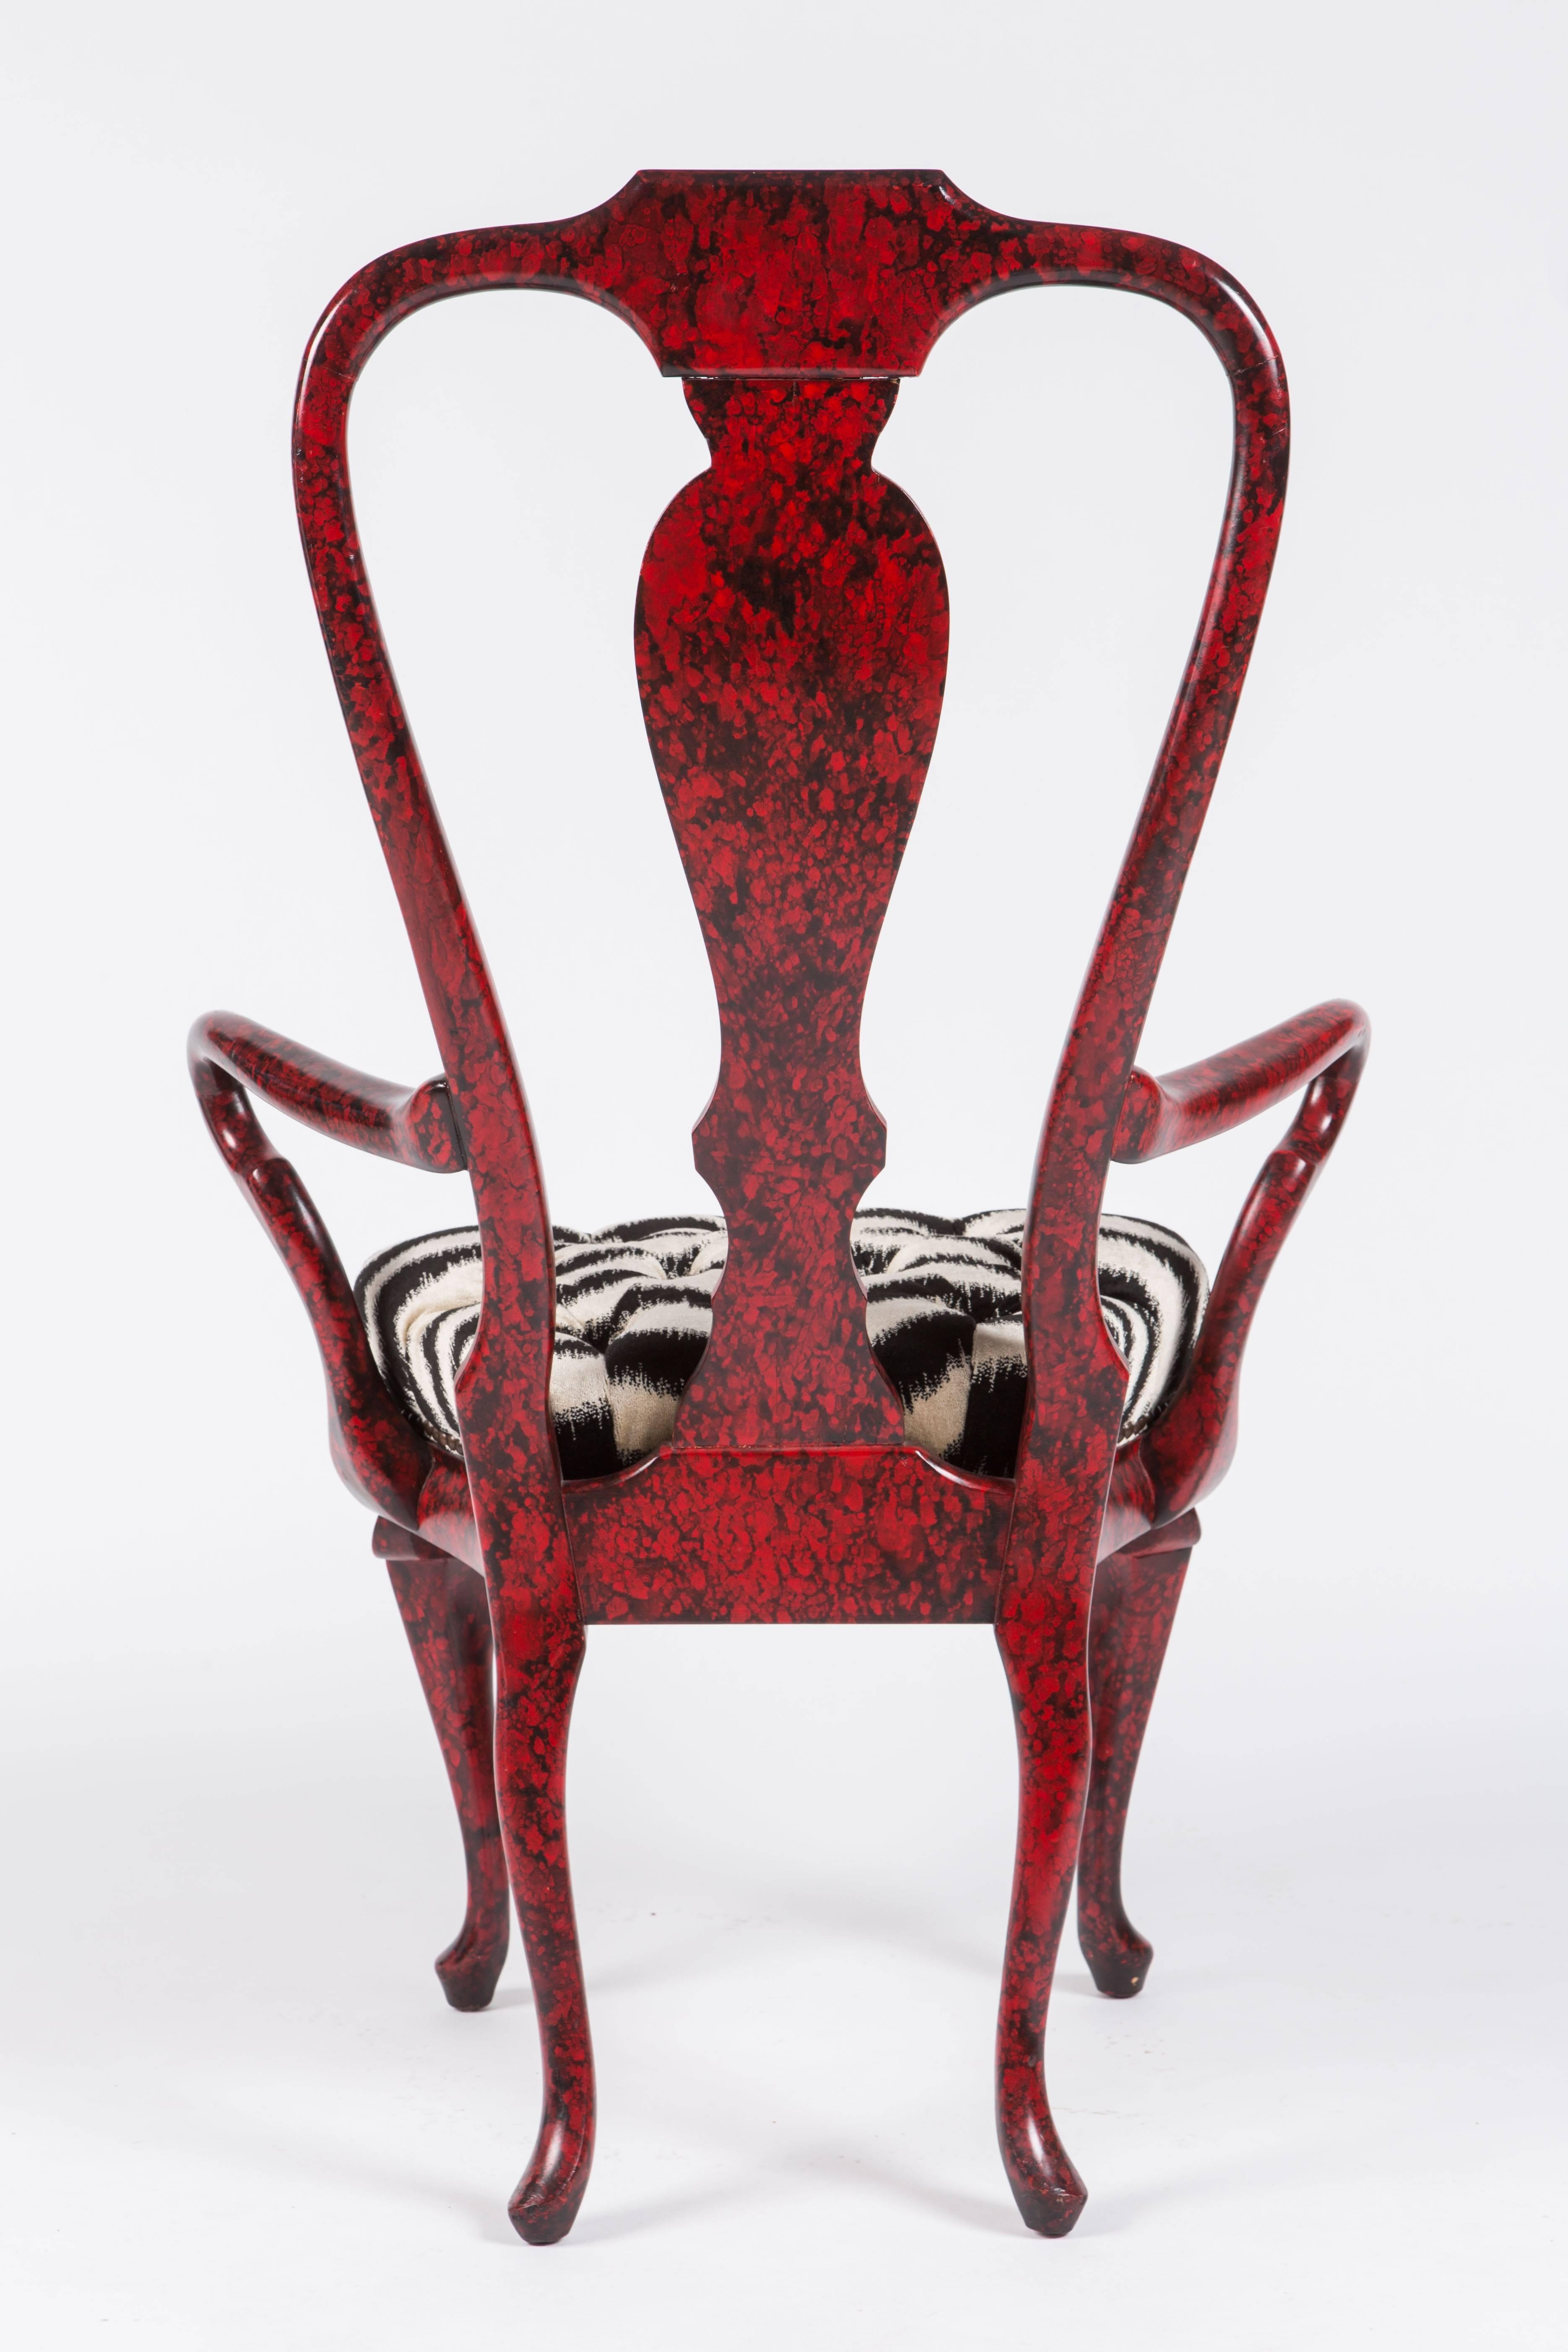 Alice in Wonderland meets Queen Anne in this dramatic pair of armchairs by Phyllis Morris. The chairs feature a marbled red and black painted finish and tufted faux zebra upholstered seats finished with nailhead trim.